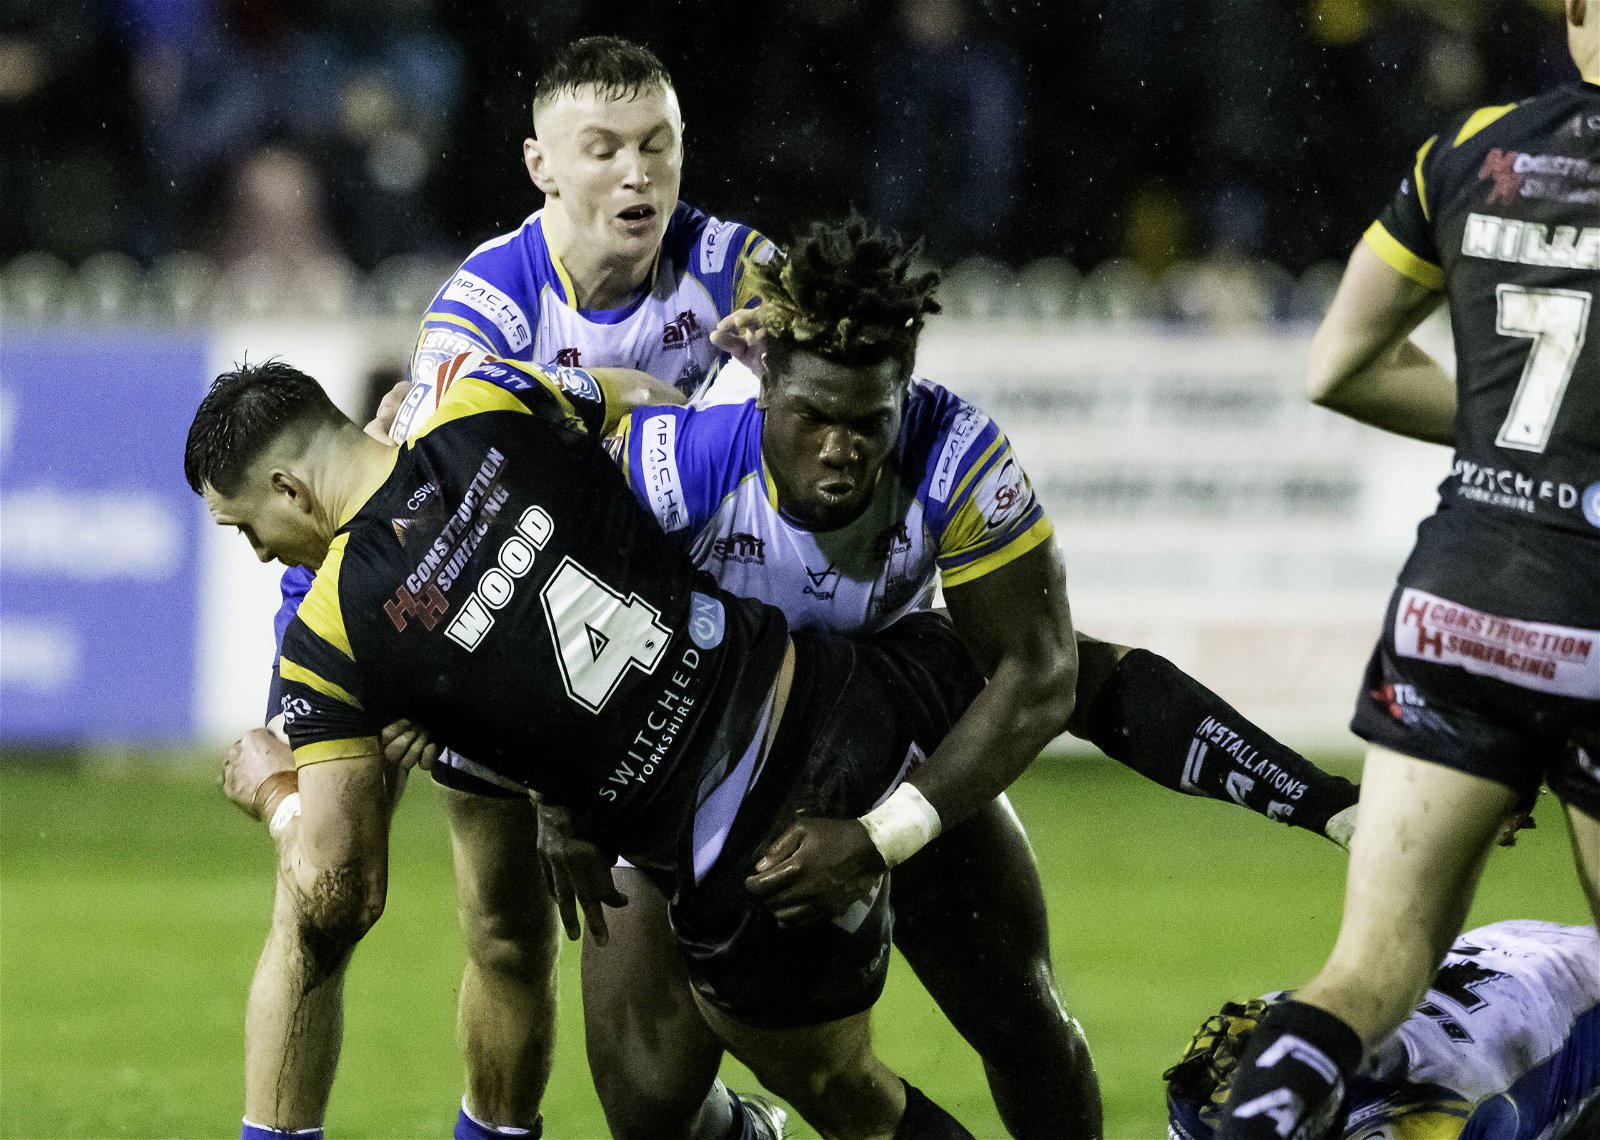 Leeds Rhinos' Justin Sangare tackles Castleford Tigers' Sam Wood in the Super League at Wheldon Road.